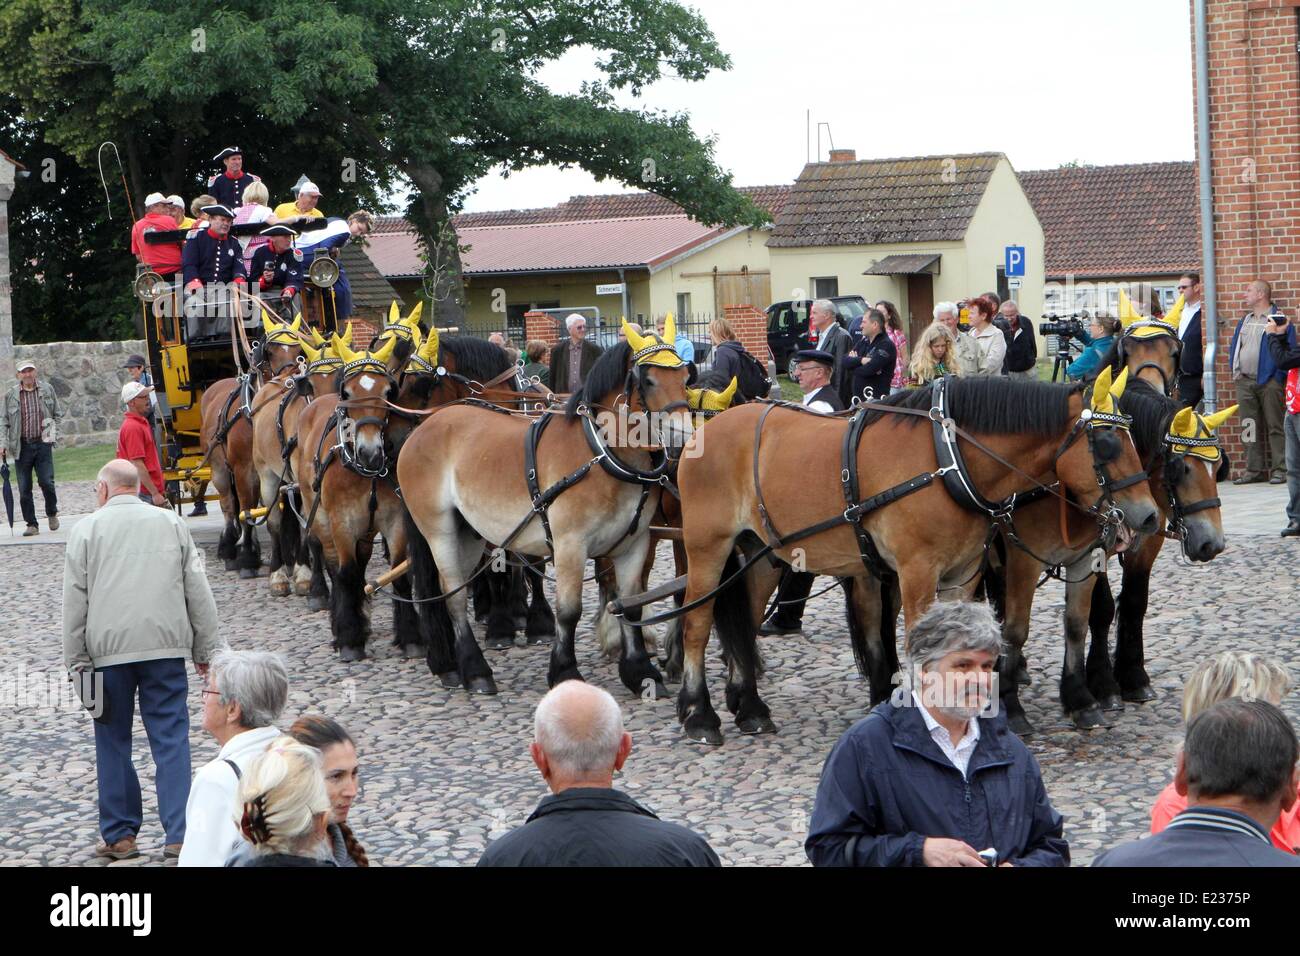 A historic stagecoach drawn by eleven horses arrives for the opening of the 20th Brandenurg Landpartie (open air event at an estate) at Gut Schmerwitz near Wiesenburg, Germany, 14 June 2014. The two day festival at the agricultural estate offers opportunities for visitors to learn about organic farming and animal welfare. Photo: Nestor Bachmann/dpa Stock Photo